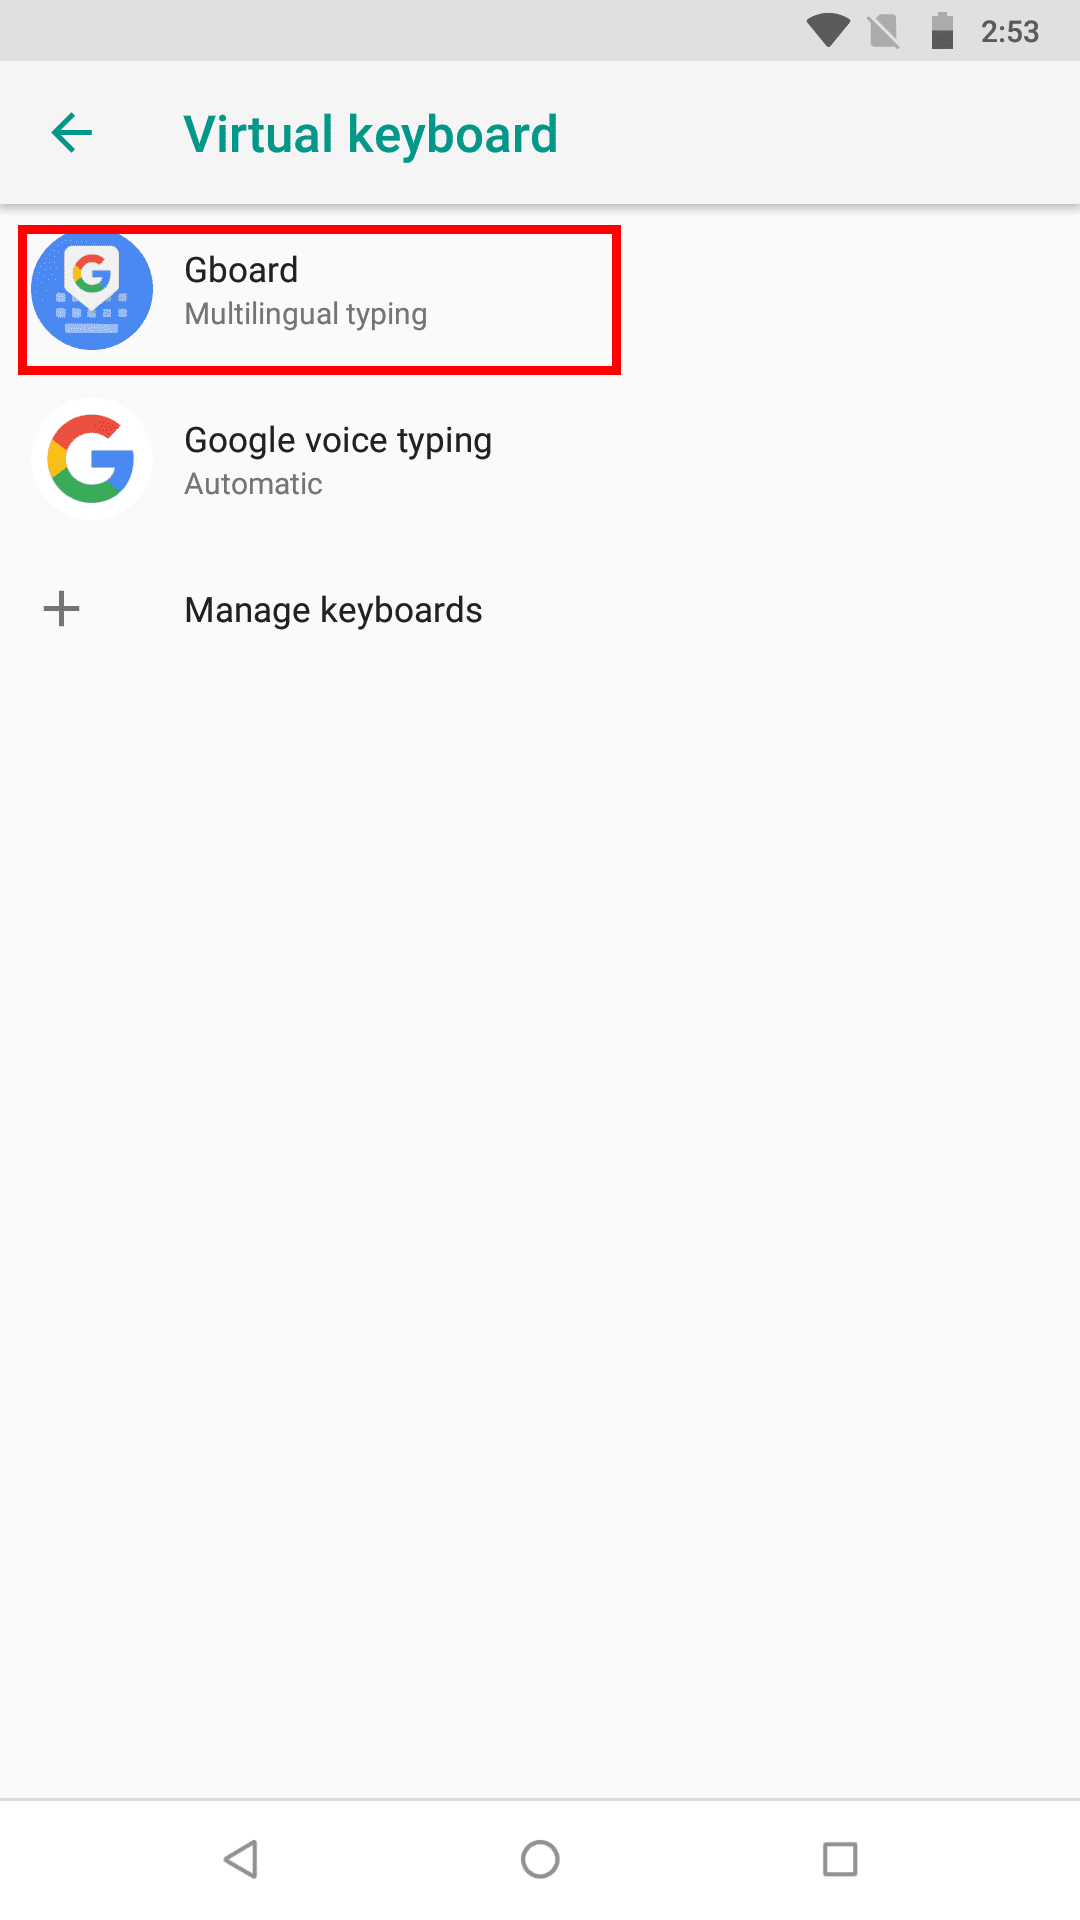 Select Gboard or the virtual keyboard you use normally